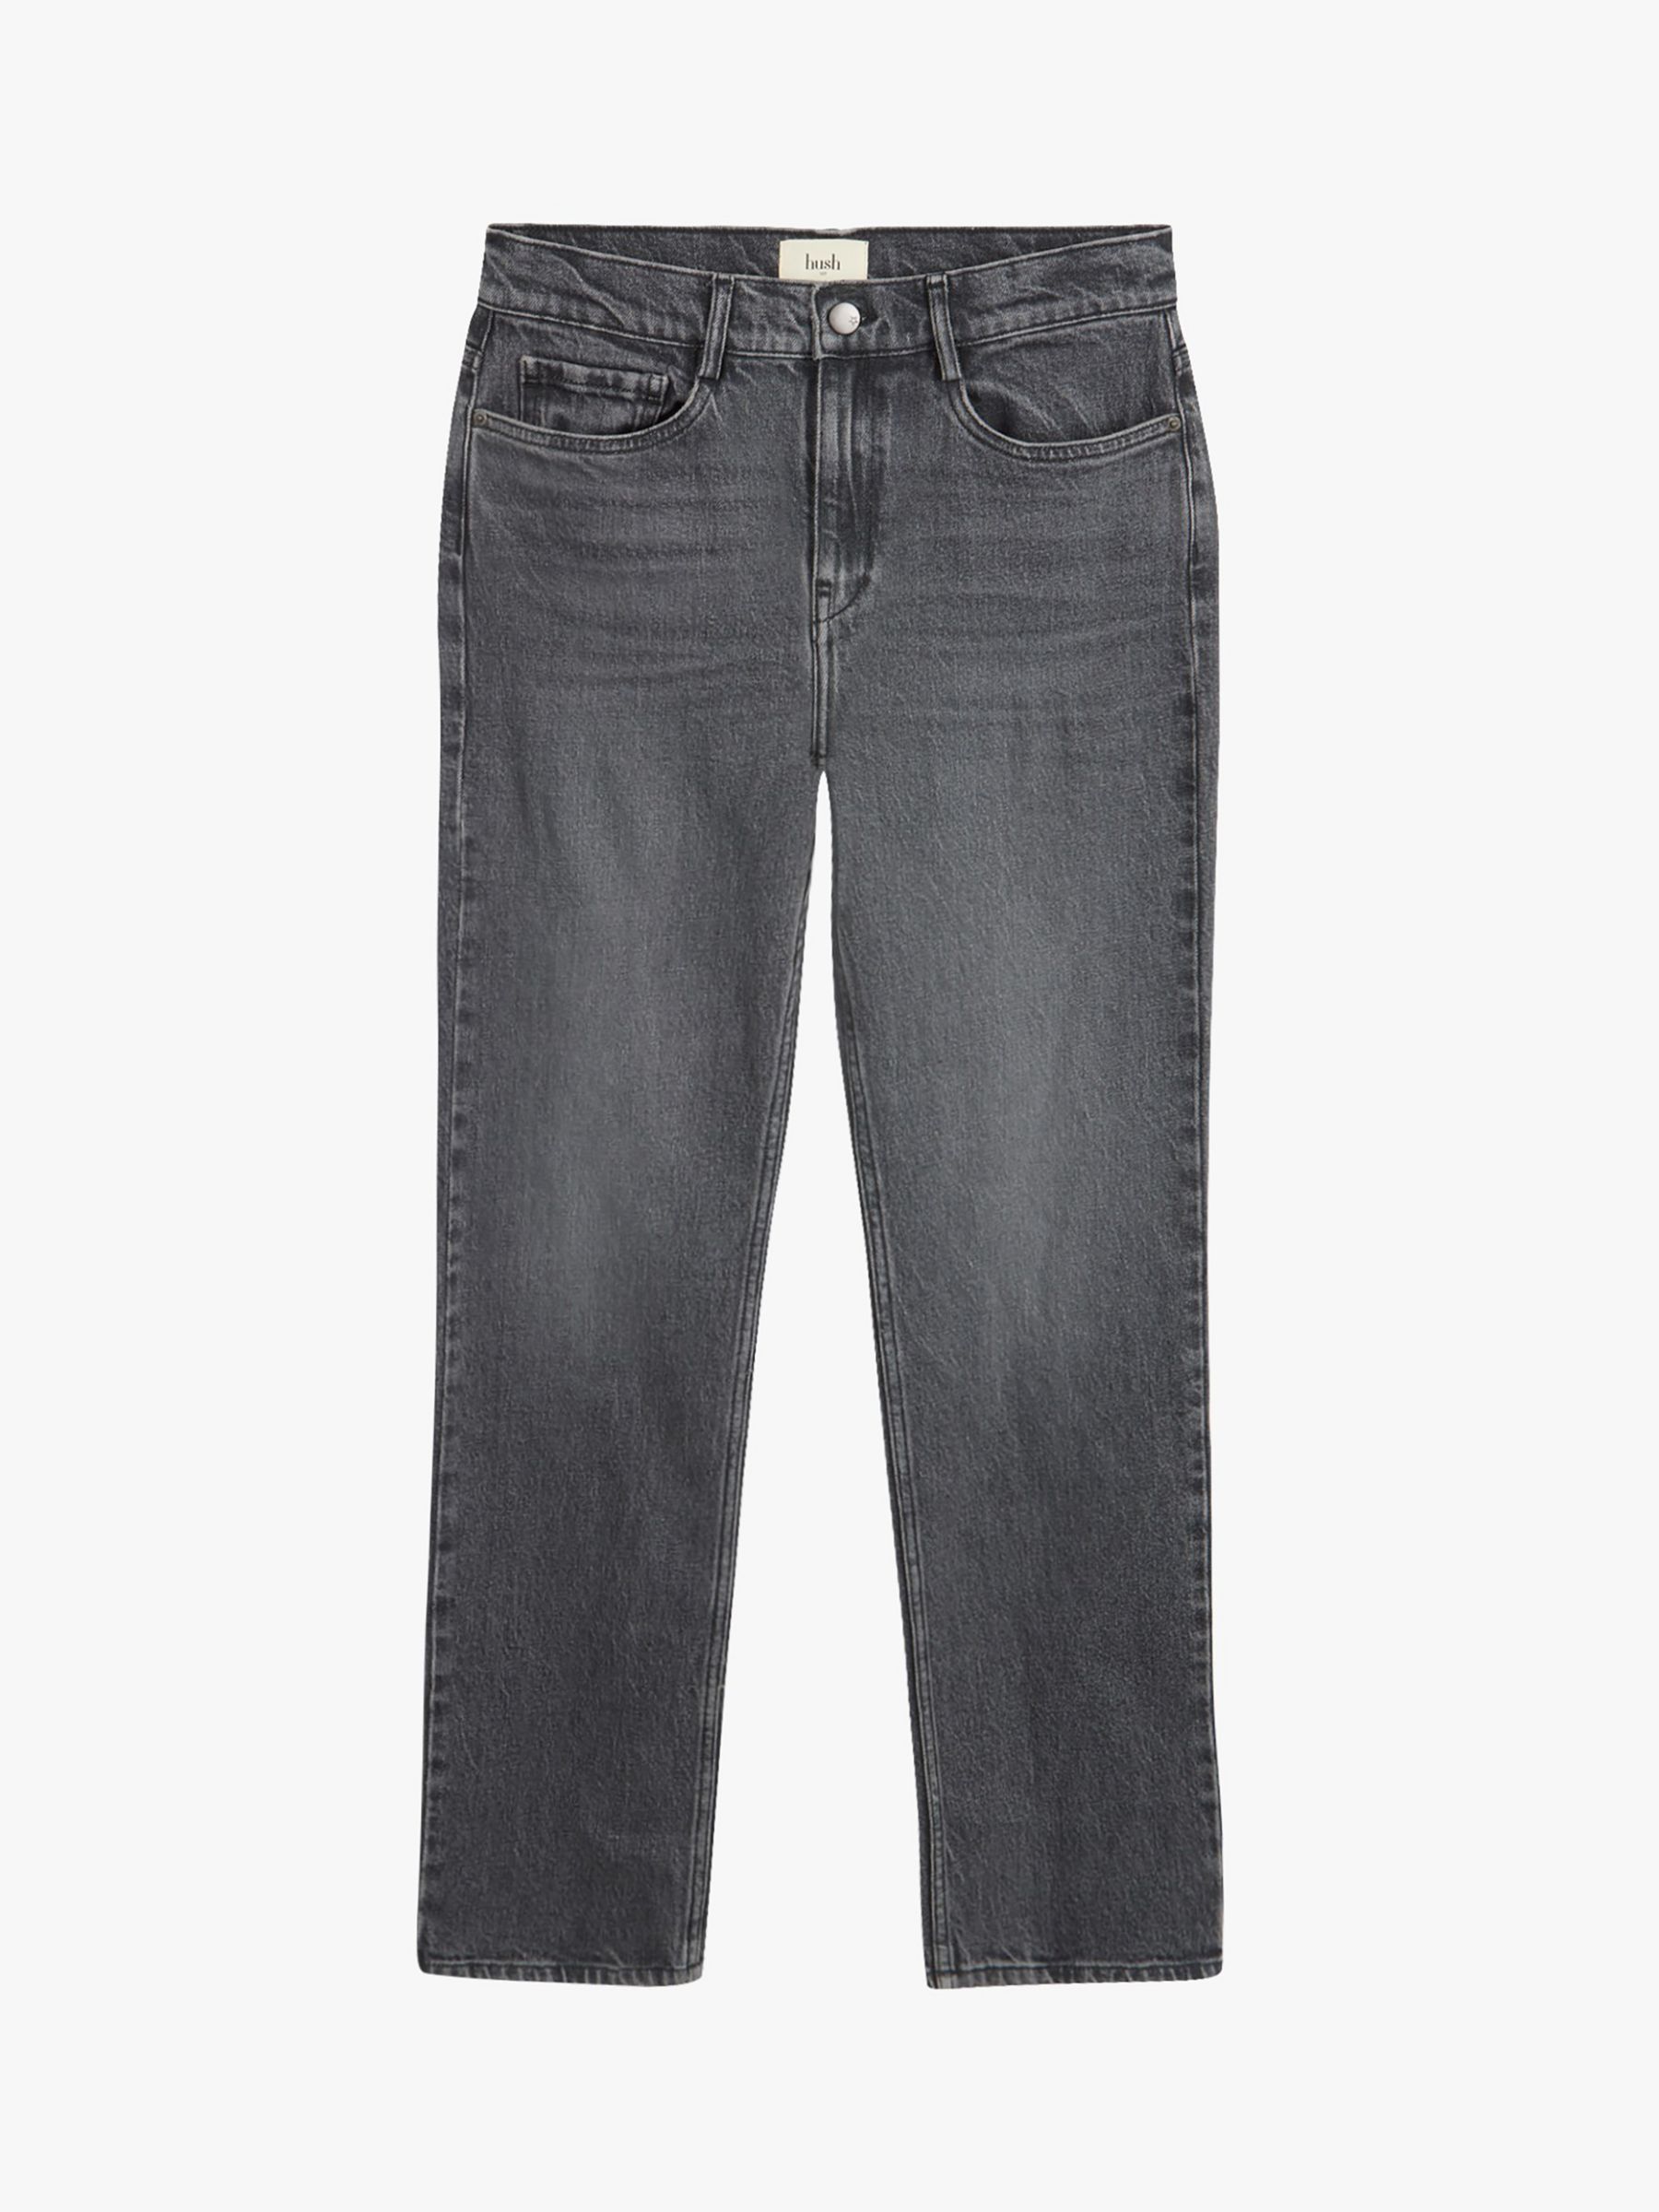 HUSH Laurie Straight Jeans, Washed Grey at John Lewis & Partners